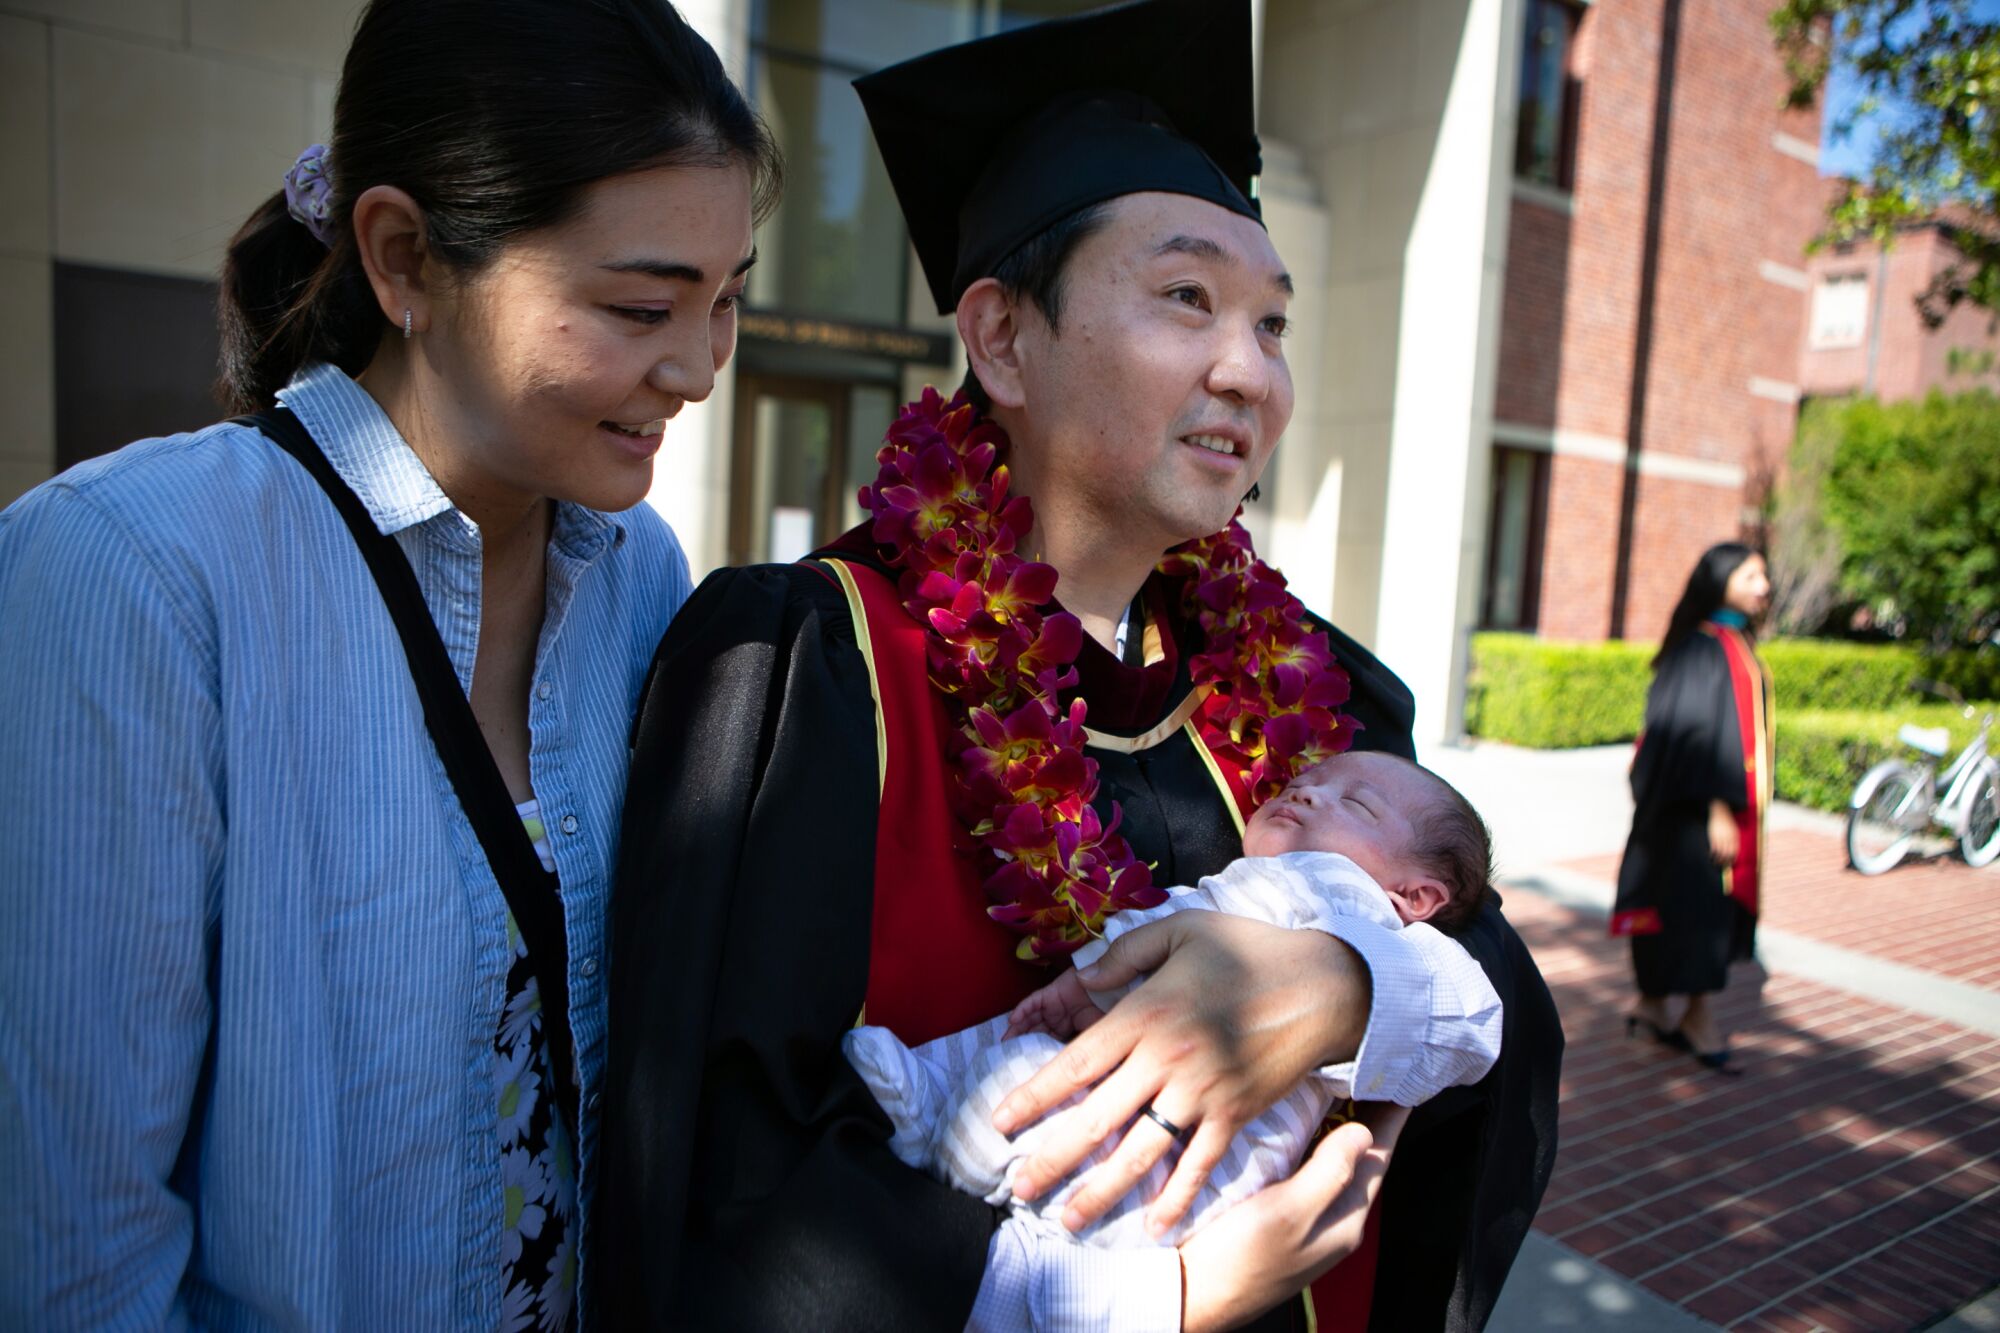 A man holds a baby as a woman looks on